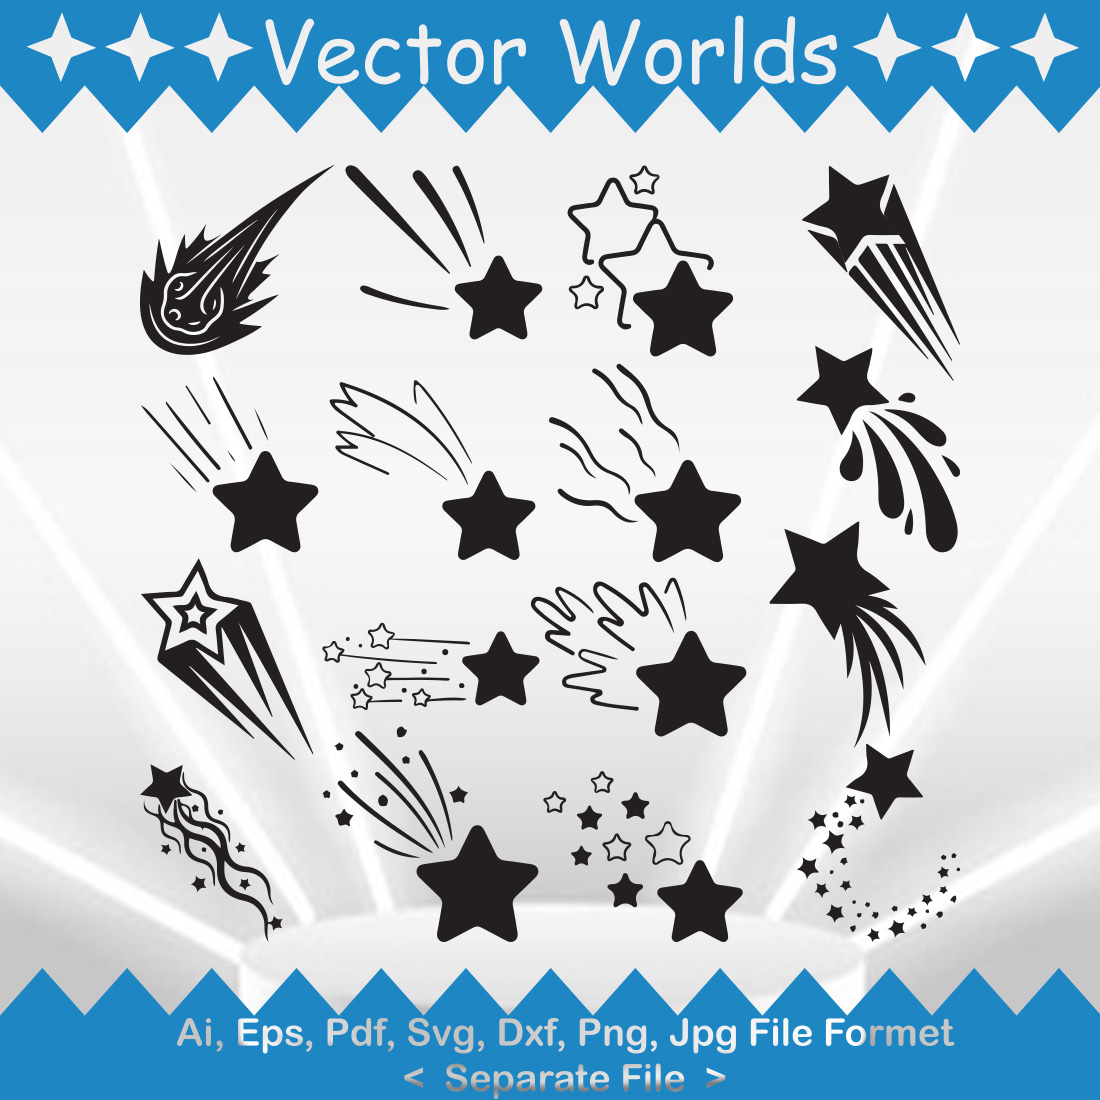 Set of vector gorgeous images of meteor comet silhouettes.